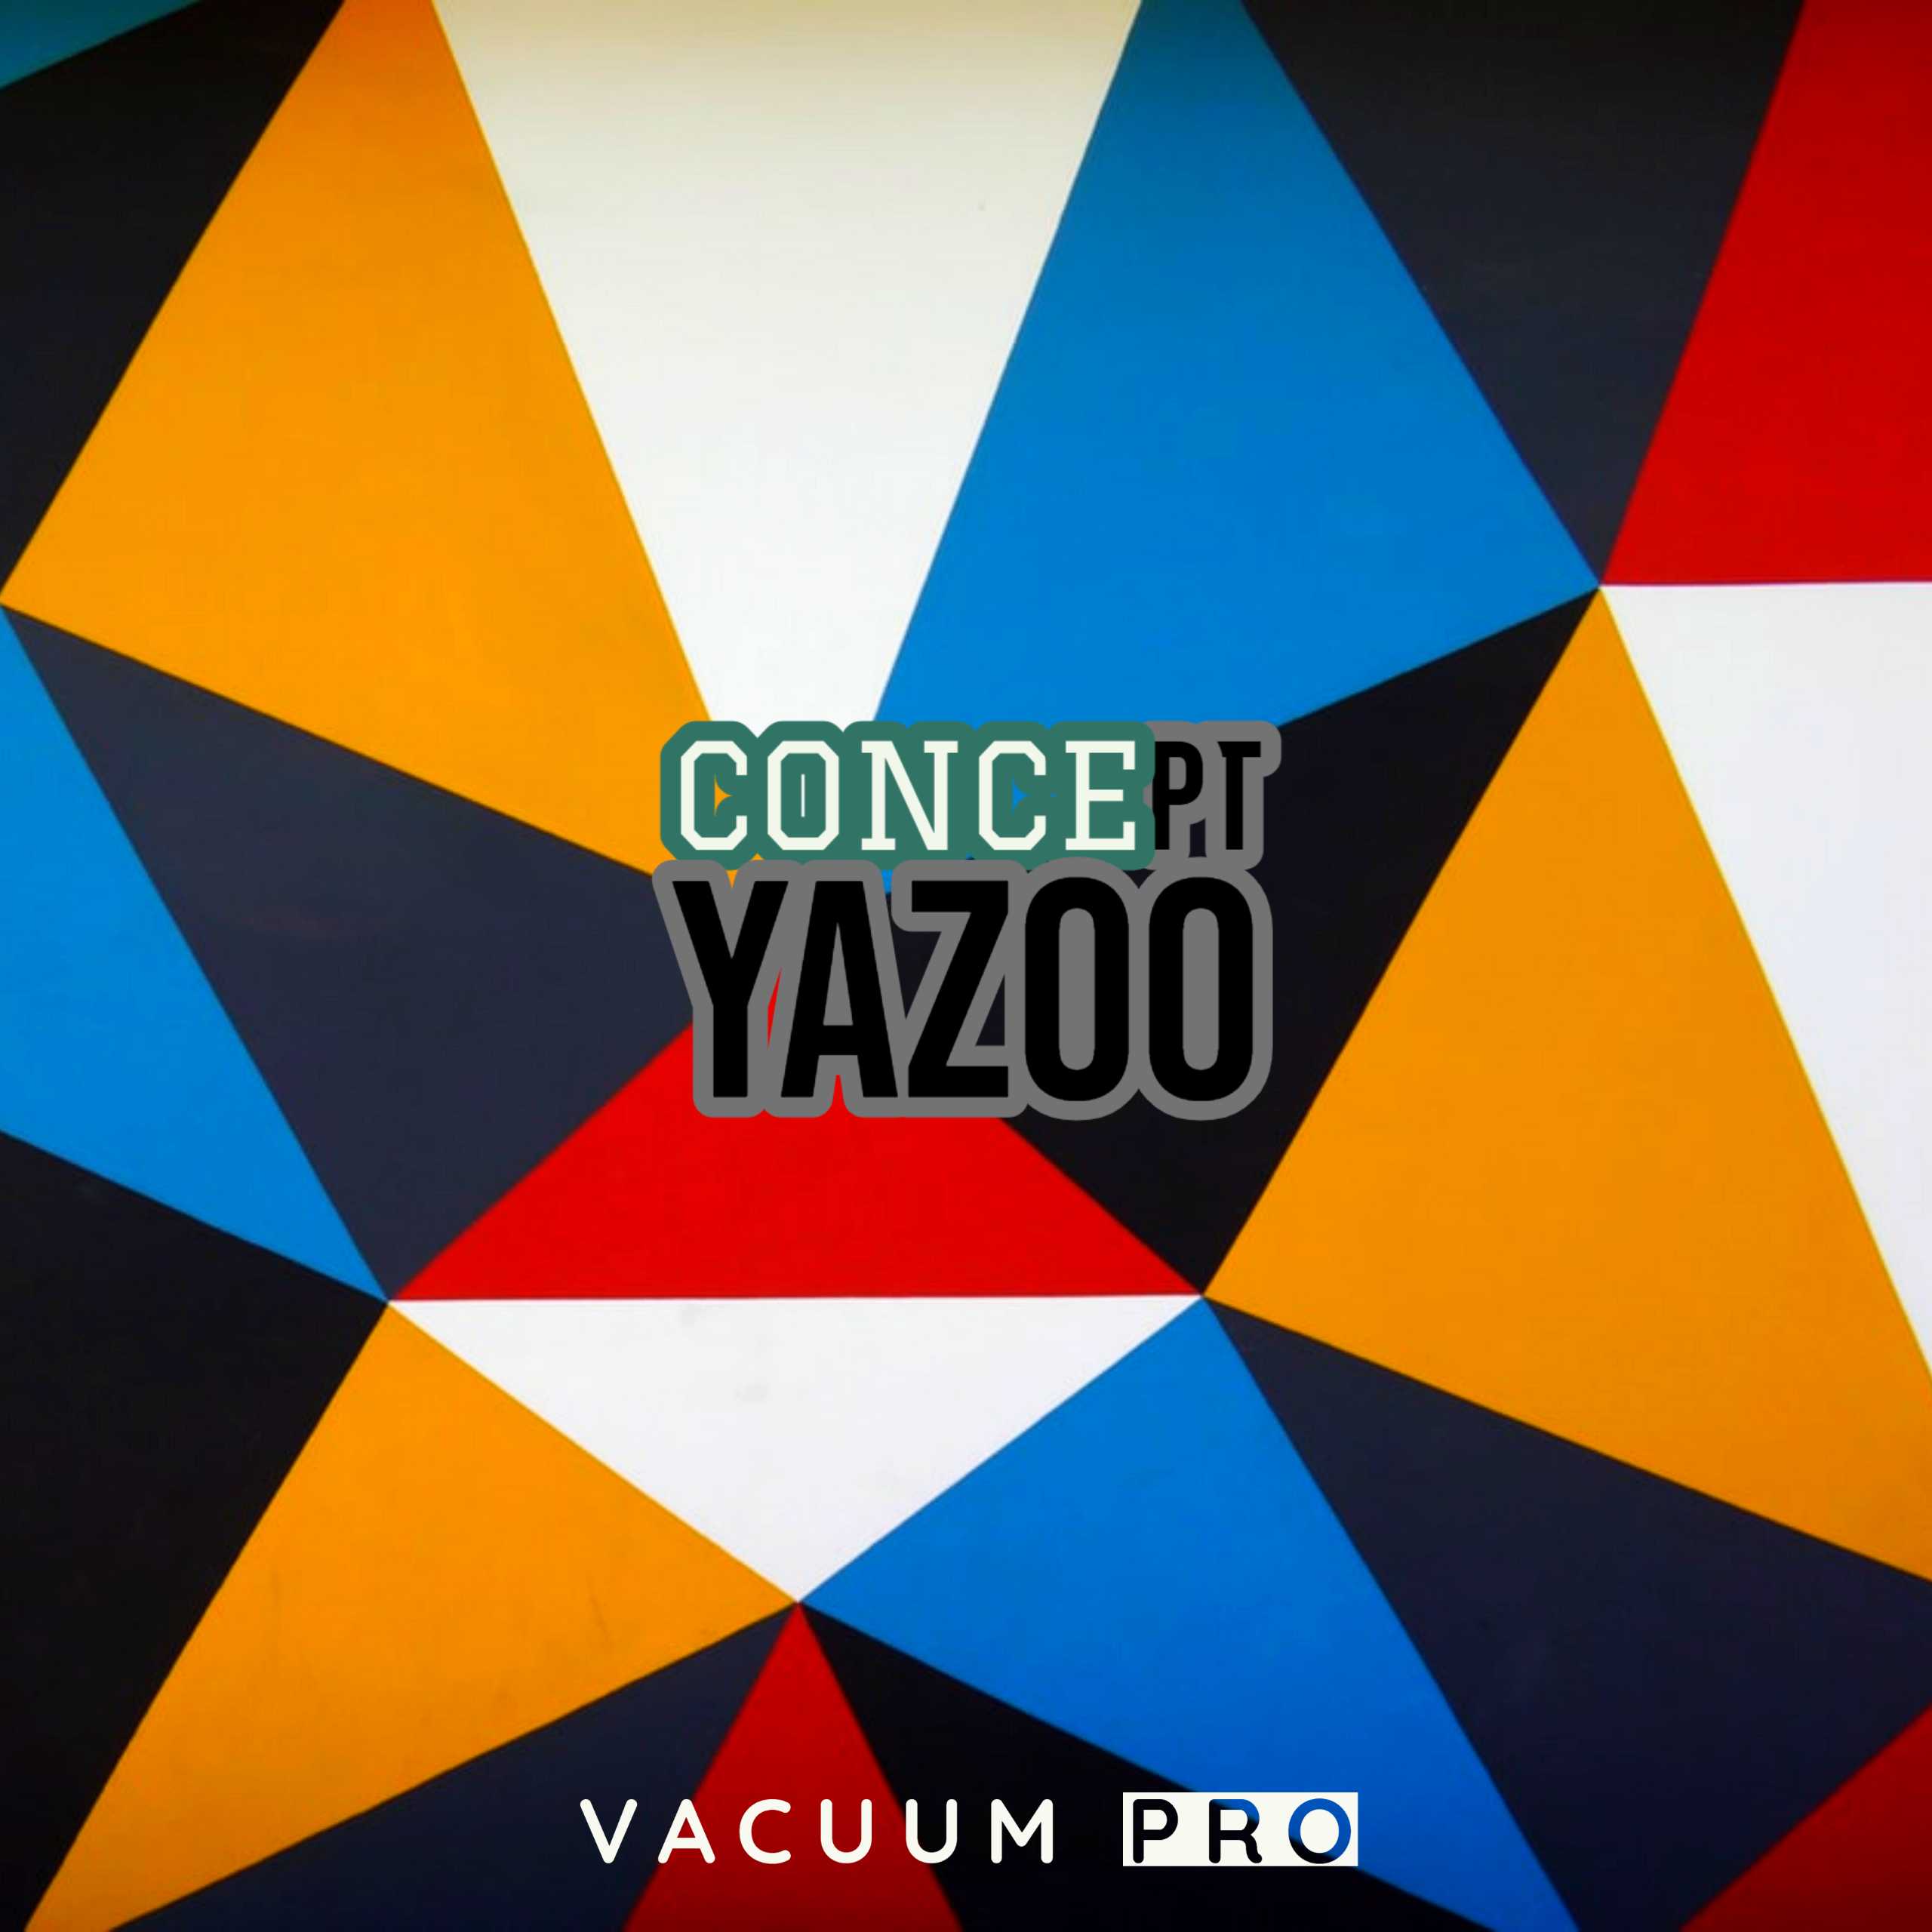 Concept Yazoo for Vacuum Pro cover artwork (colorful swirls)